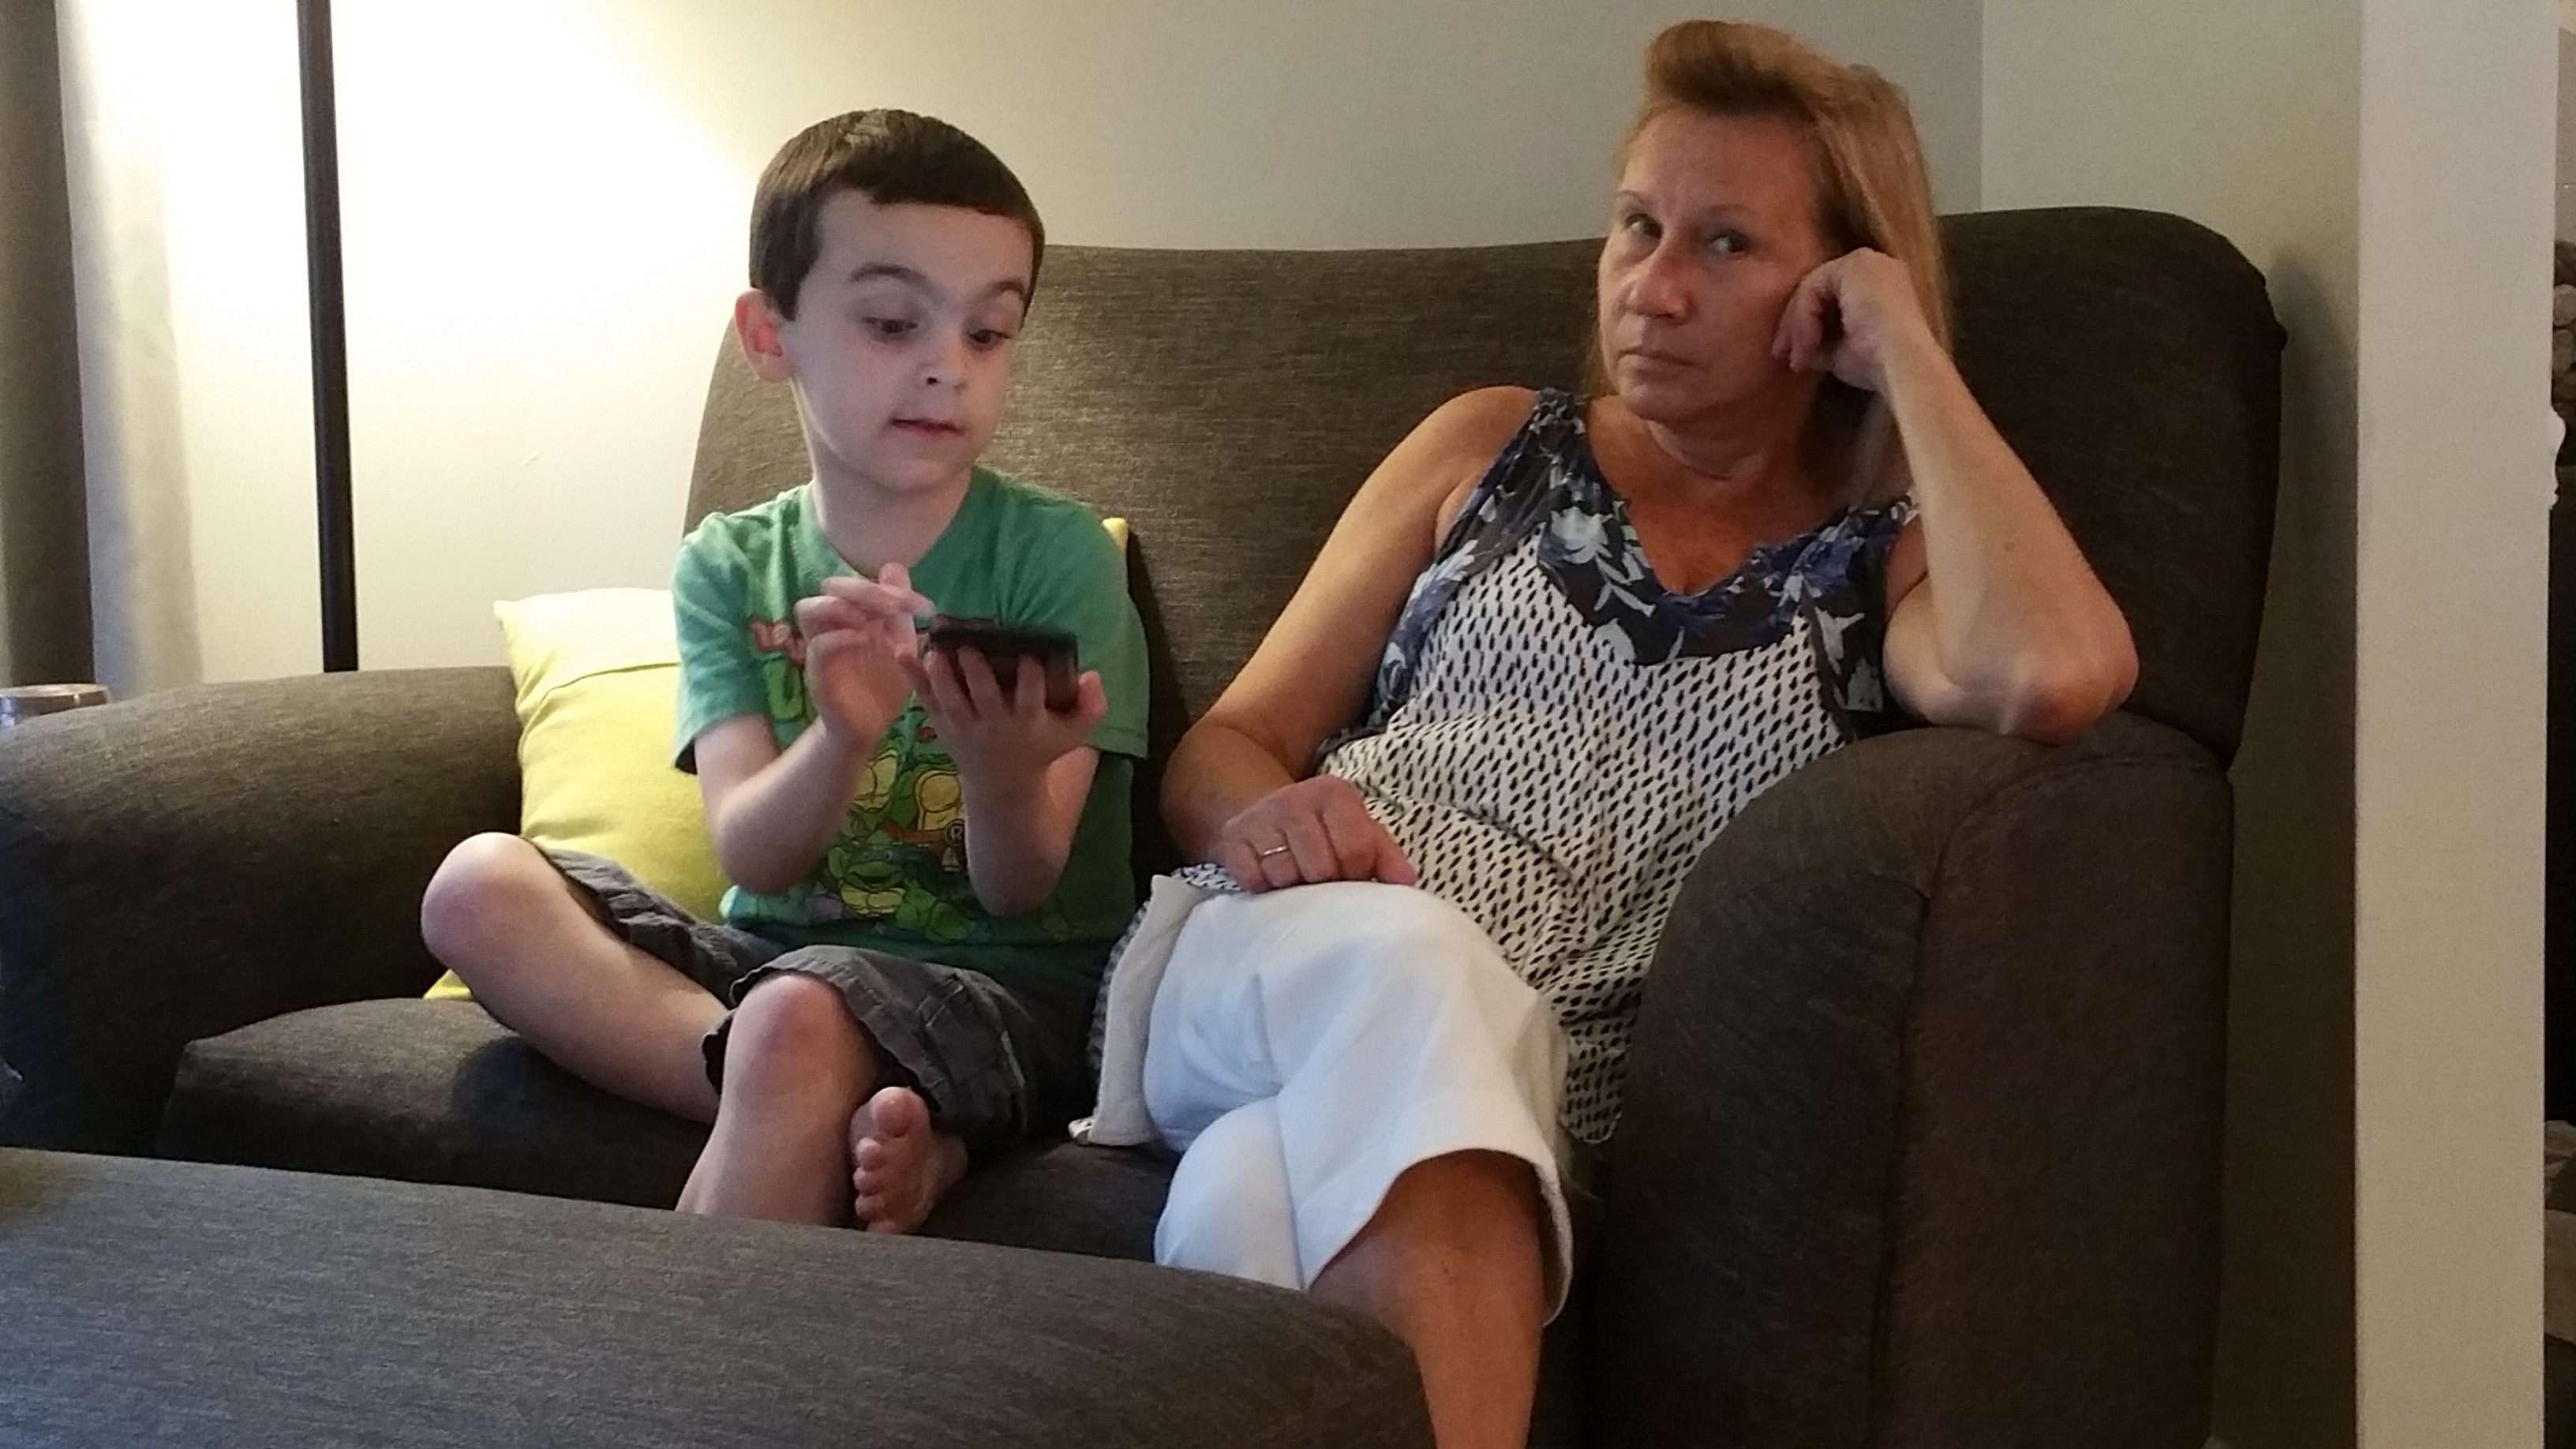 My mom was overjoyed to learn about Pokémon Go from my nephew - Imgur